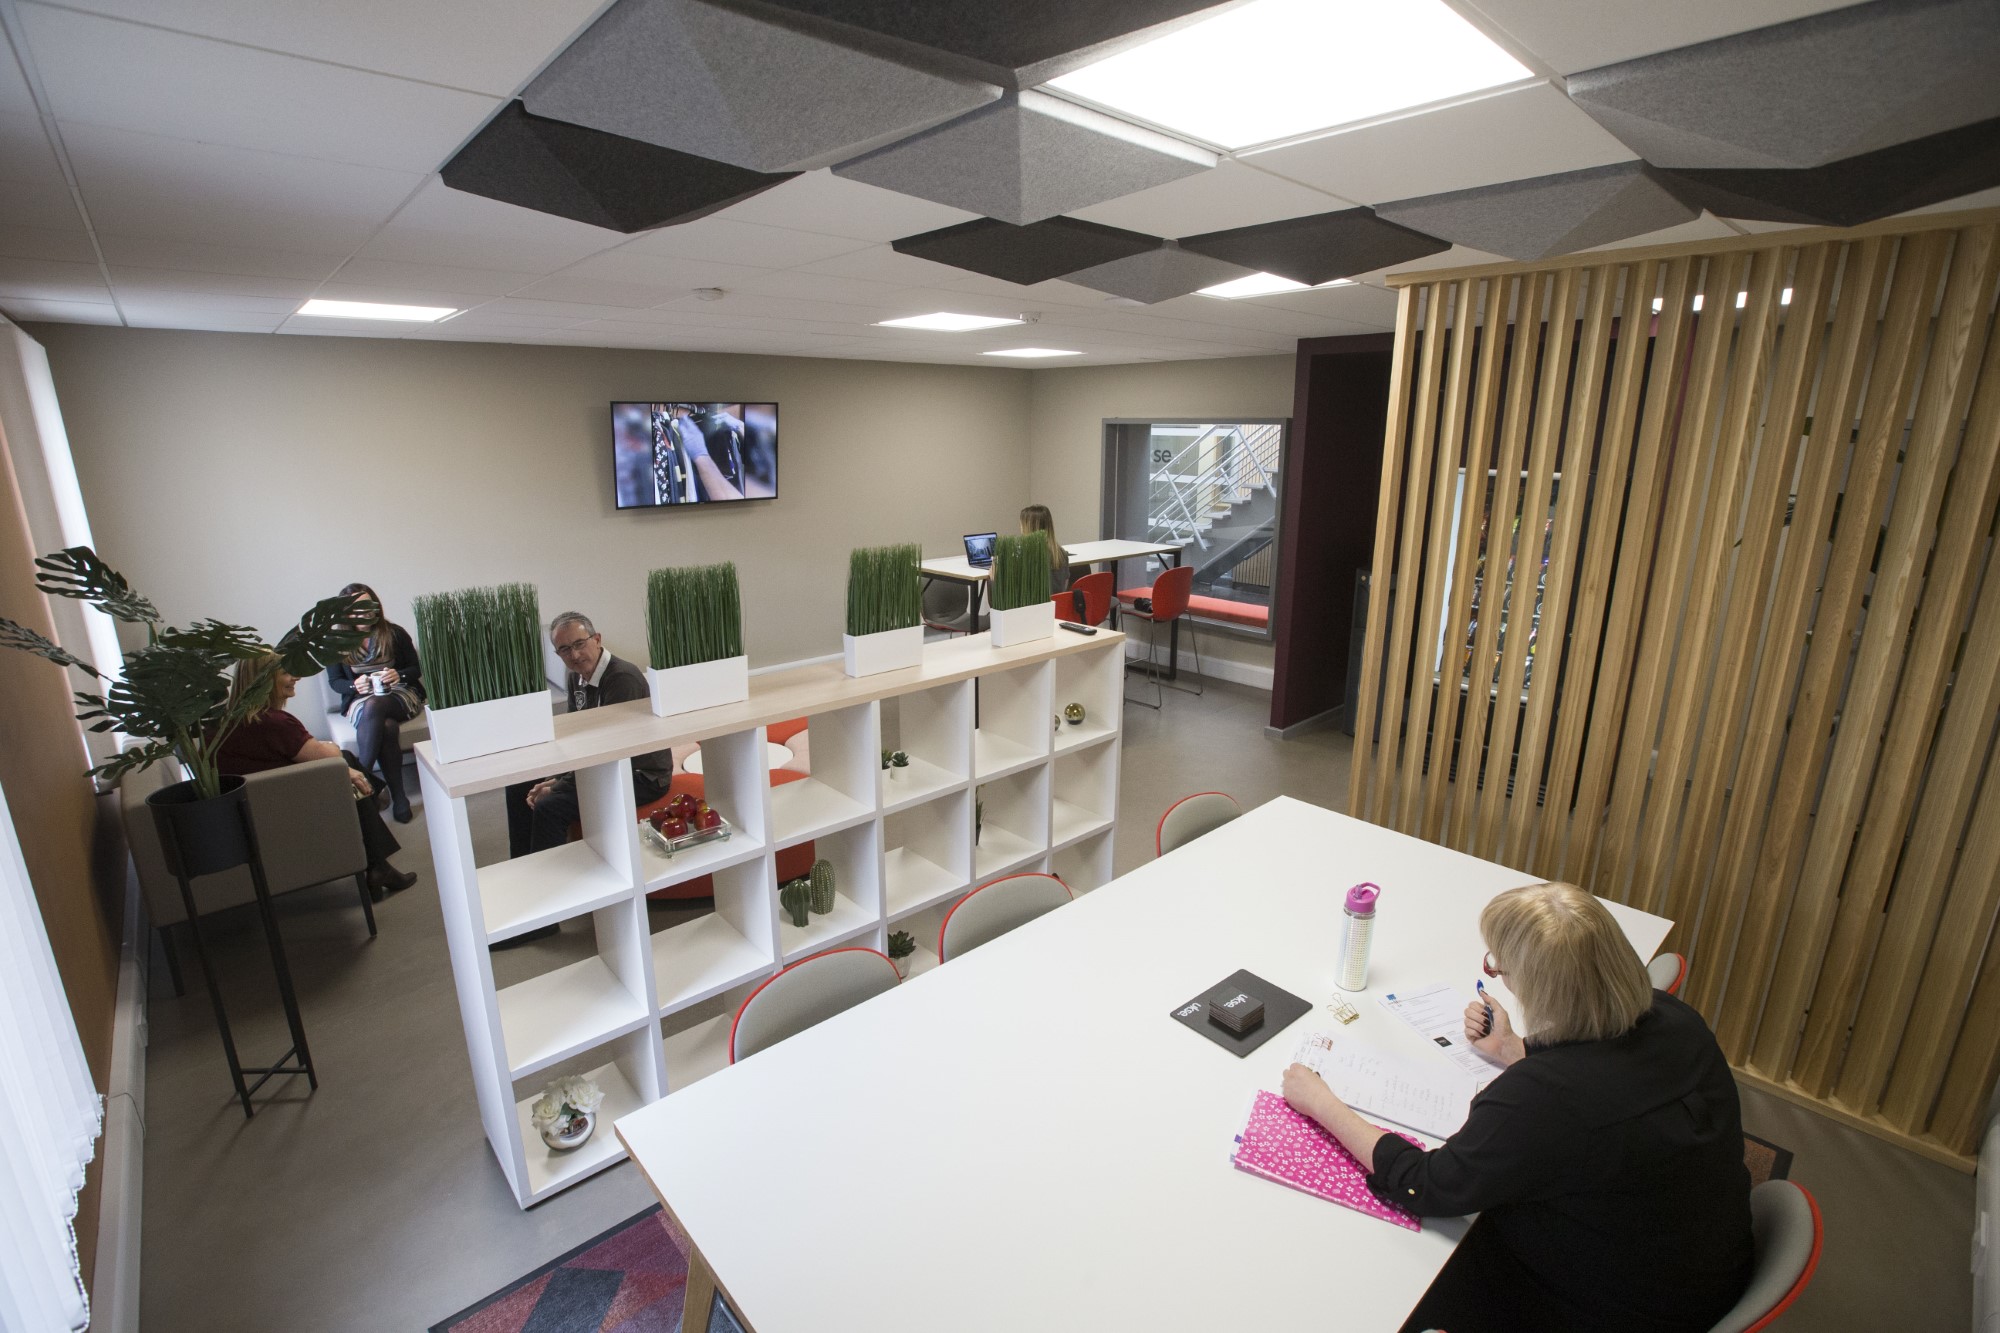 Seating area with decorated shelving space inside UKSE's offices to rent